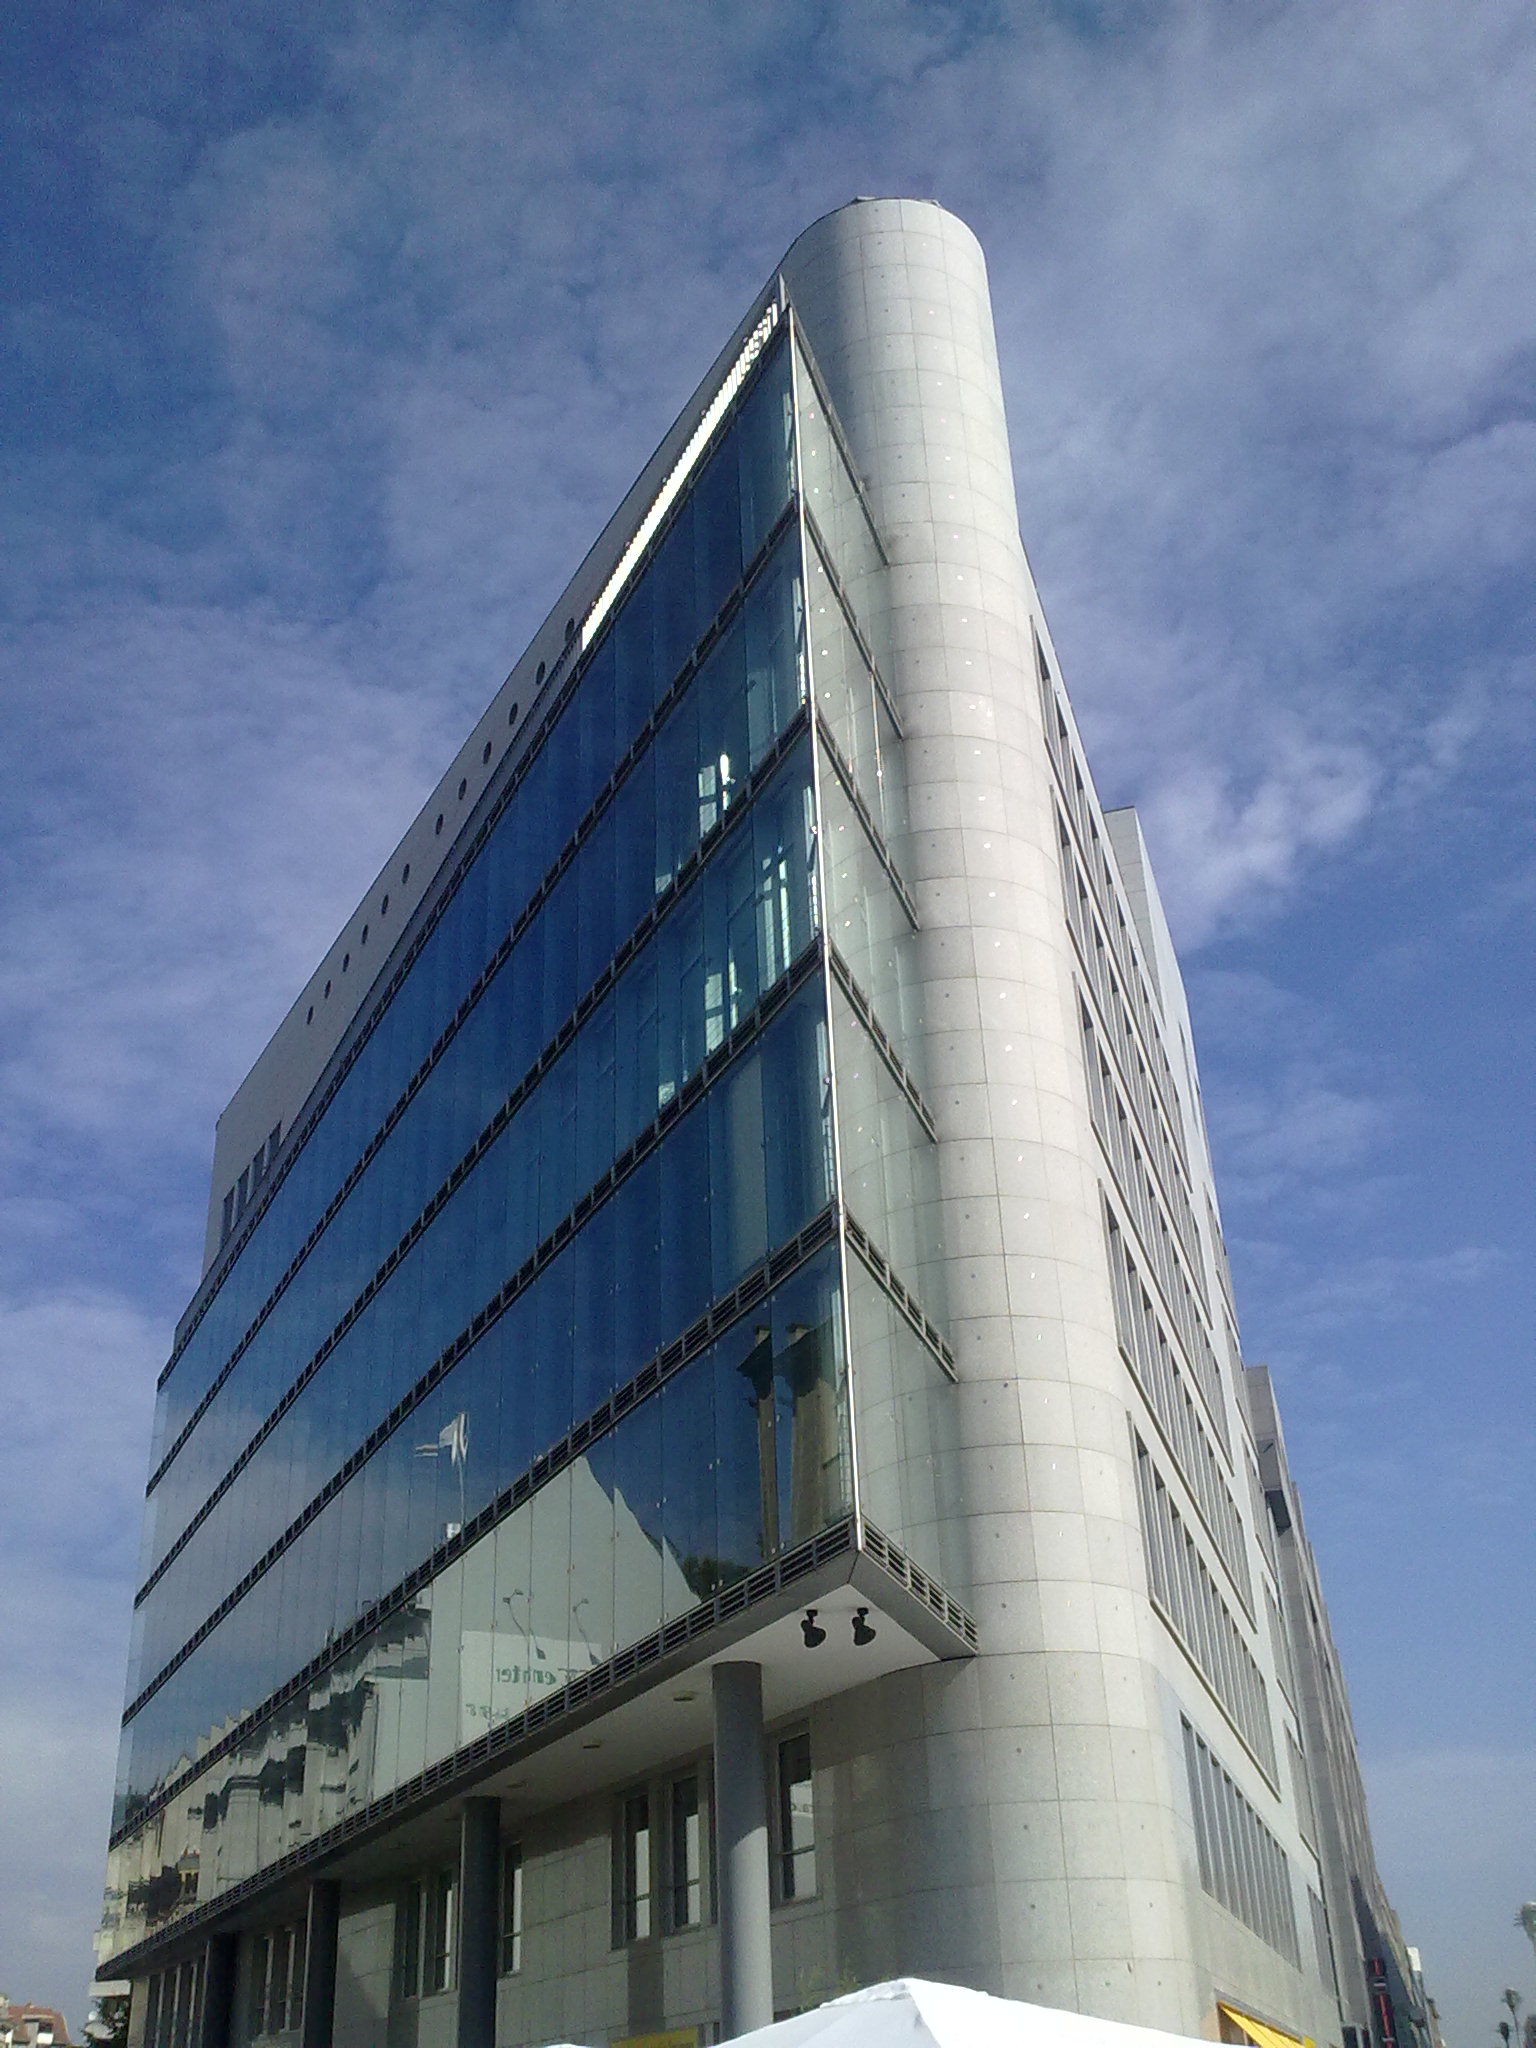 the building has multiple floors and glass windows